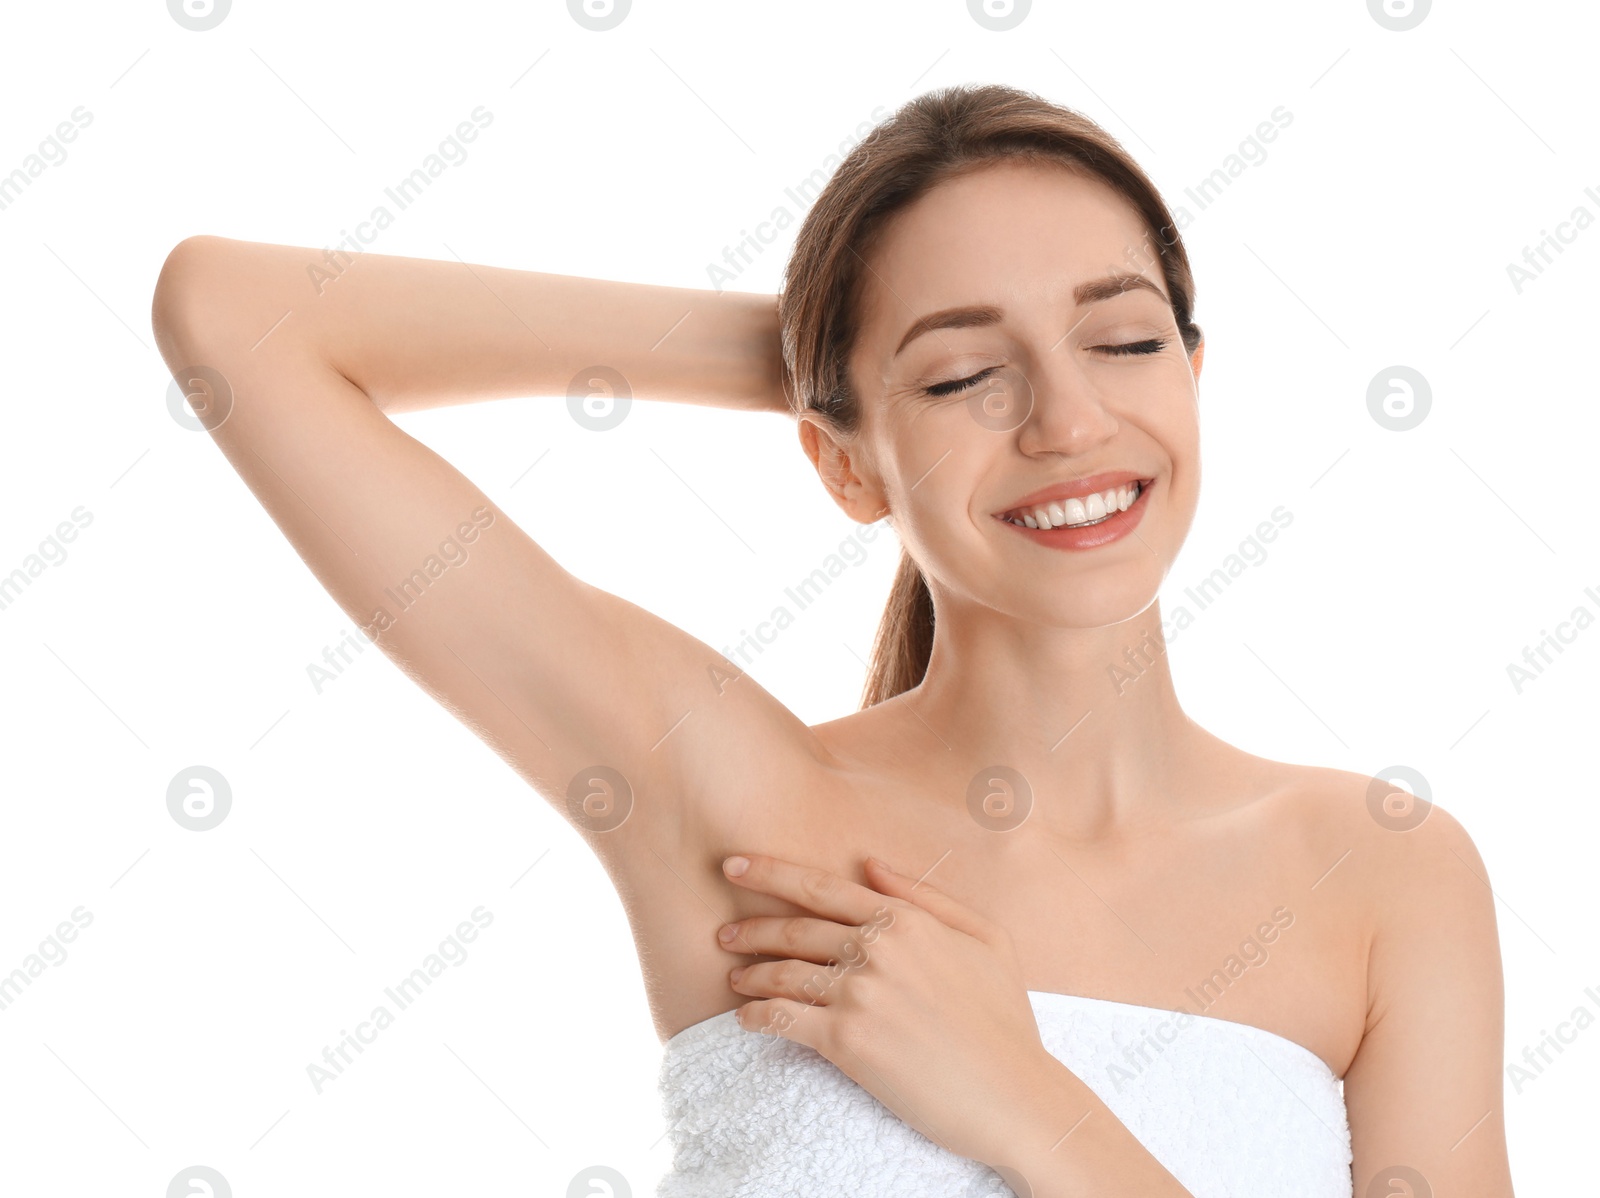 Photo of Young woman showing armpit with smooth clean skin on white background